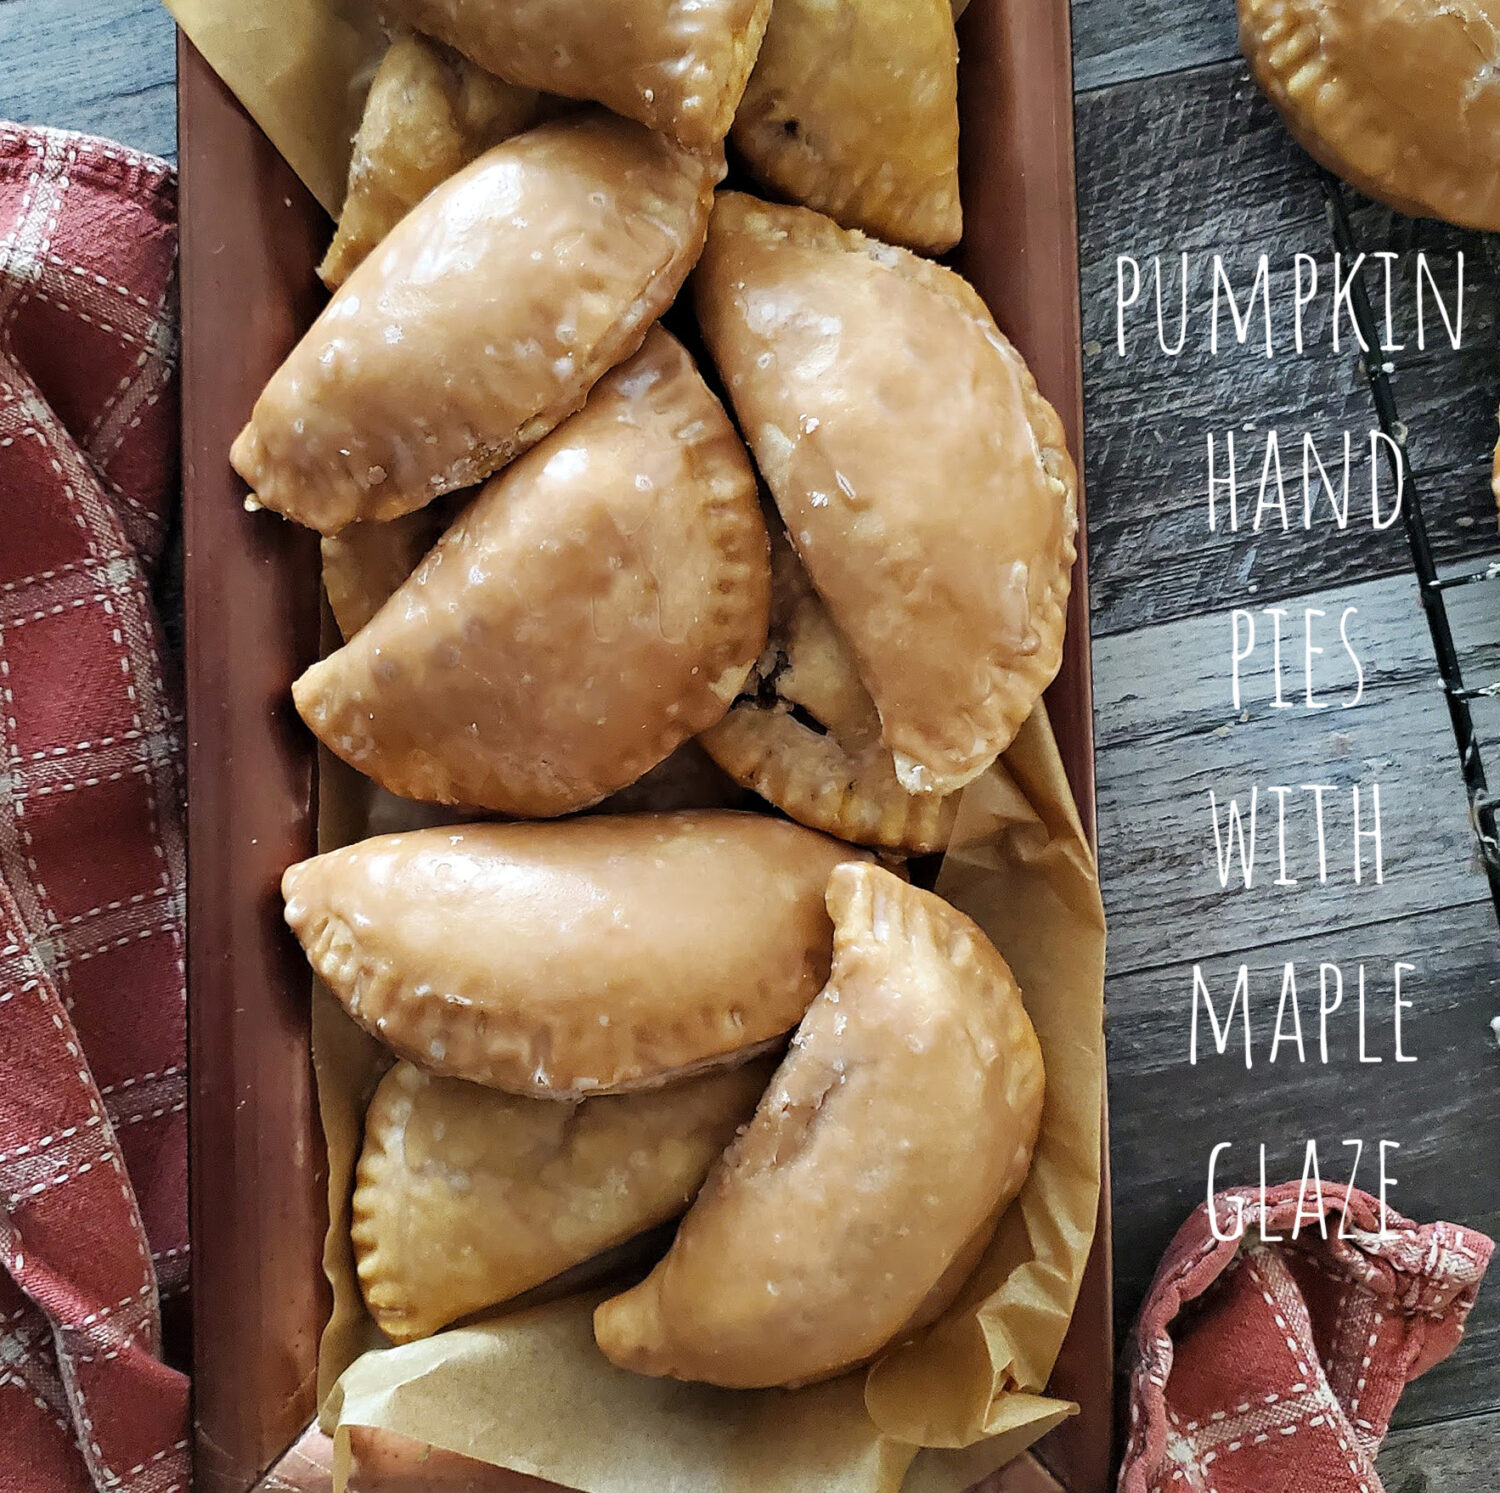 Spiced pumpkin pie filling baked in a buttery flaky crust, and maple glaze for a tasty hand-held dessert; autumn never tasted so good.